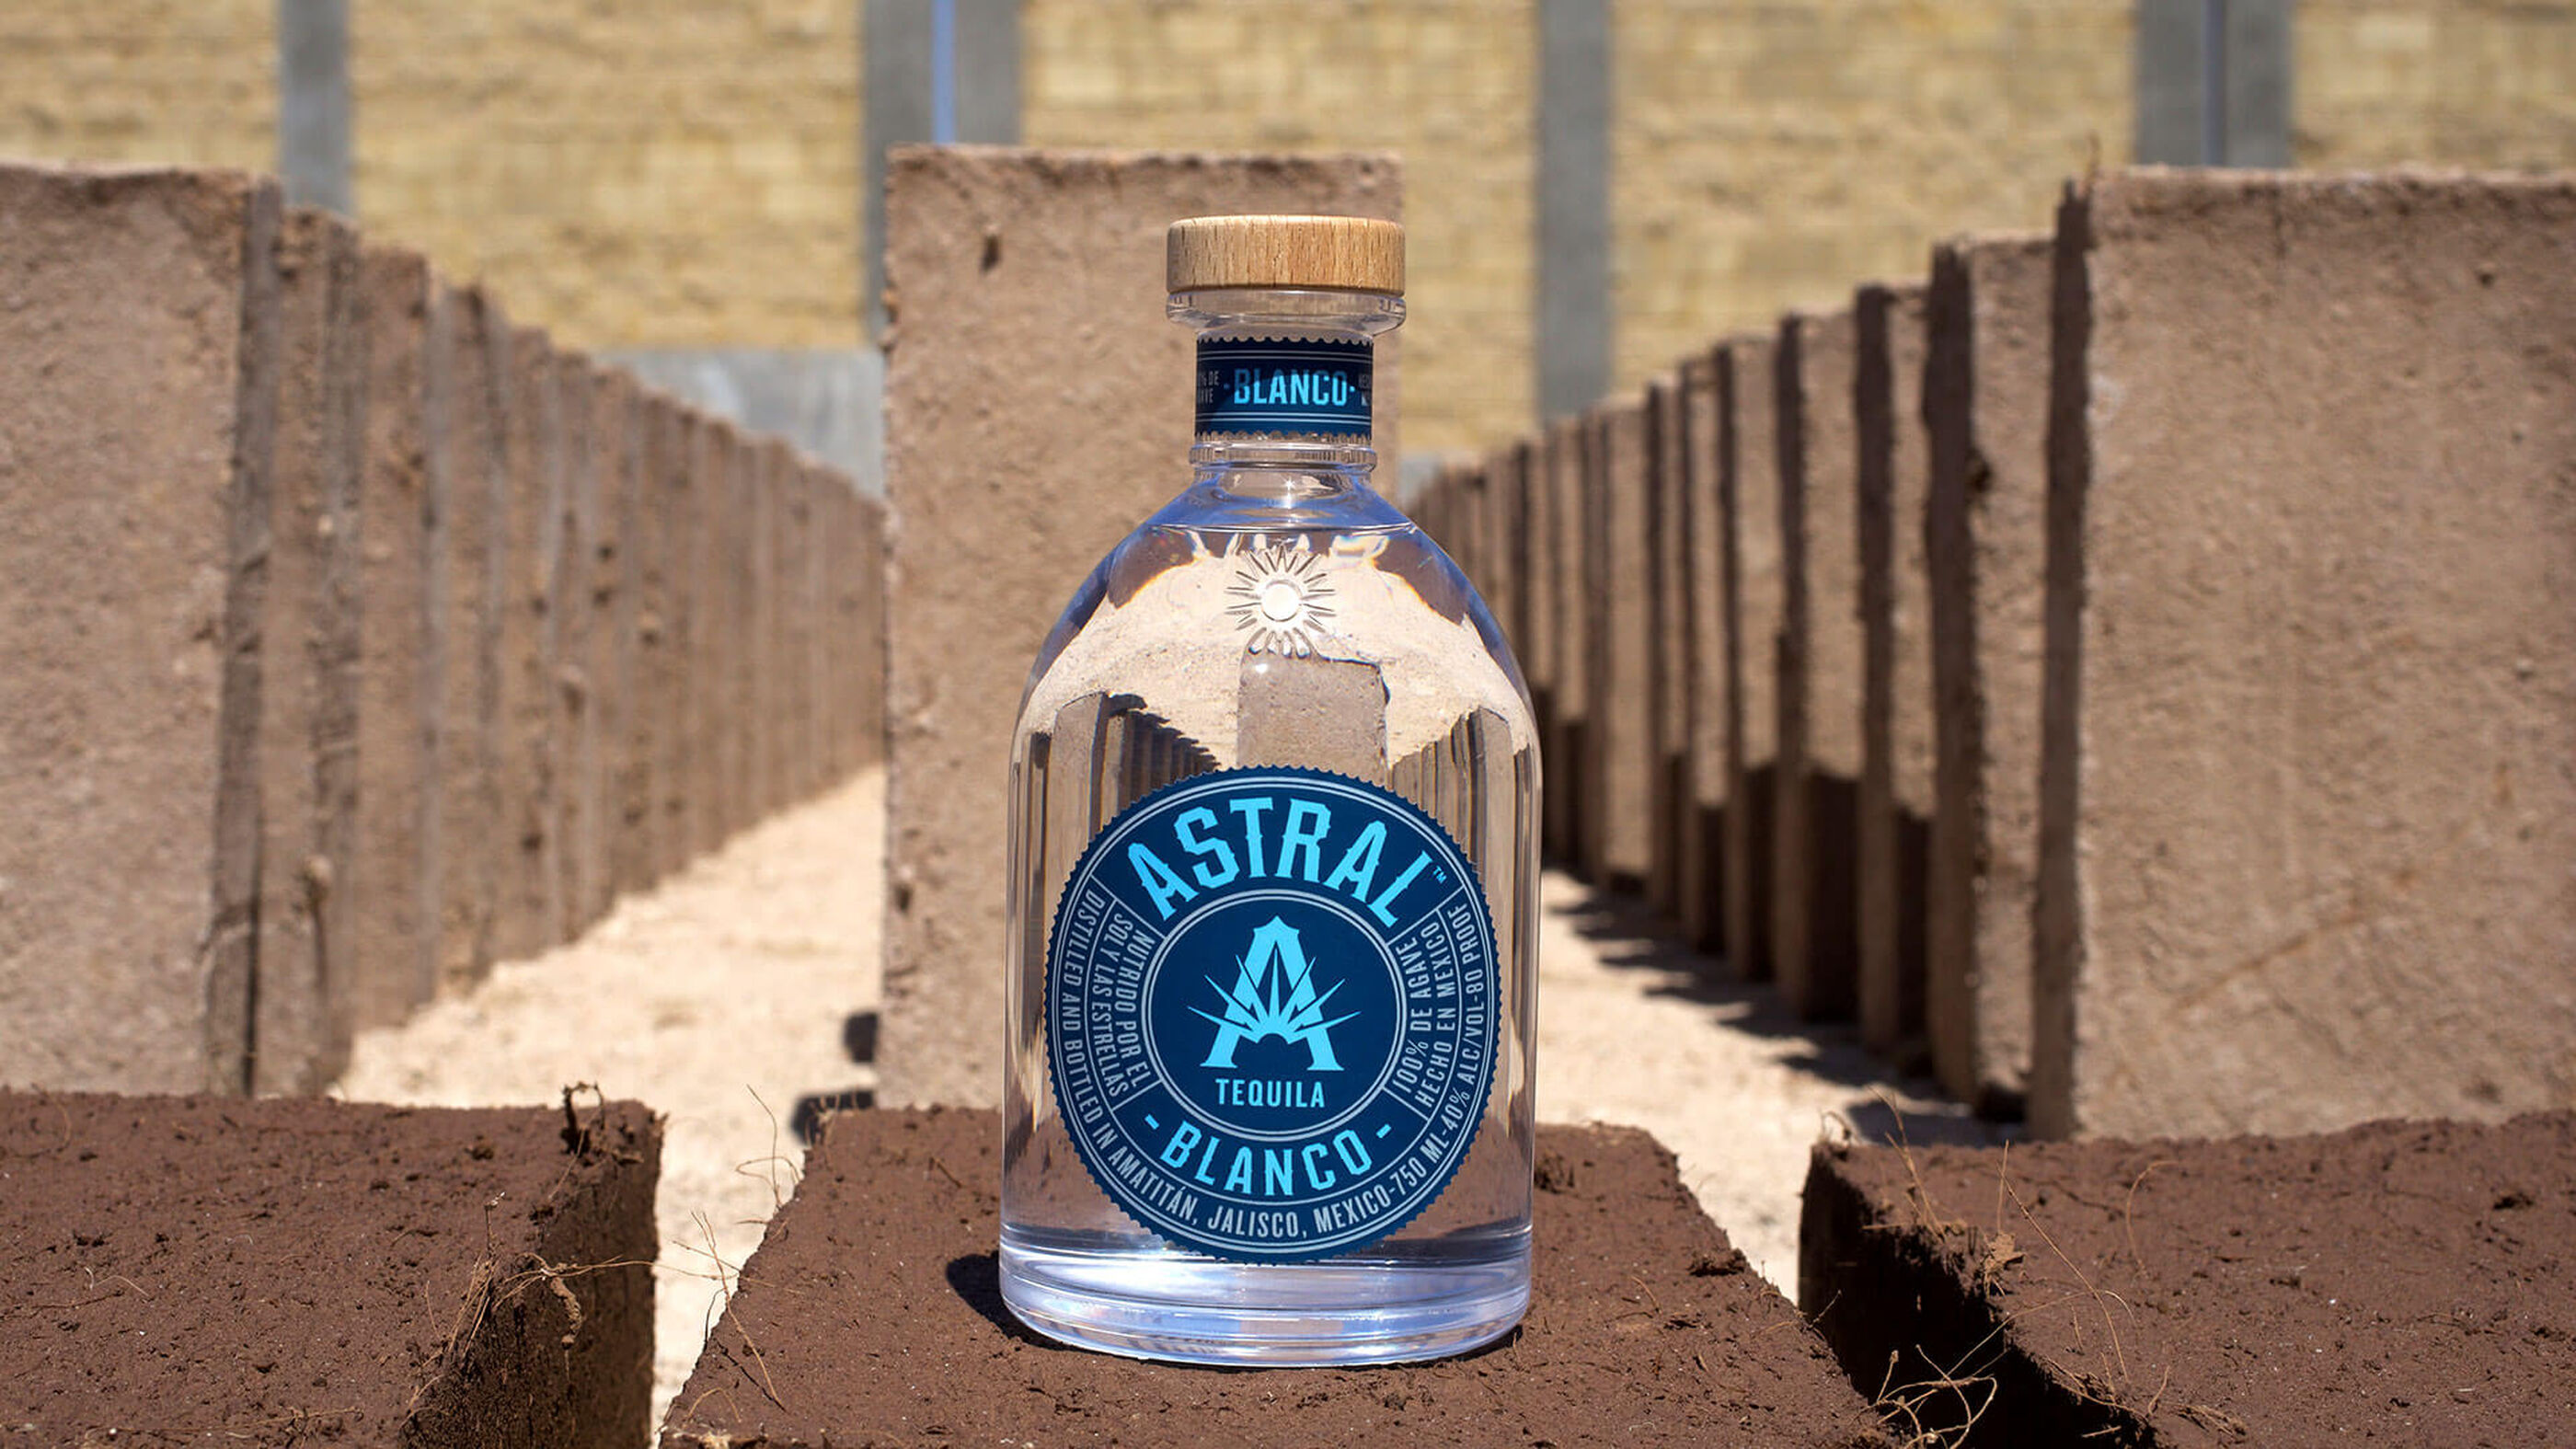 Image of Astral Tequila on a recycled agave brick